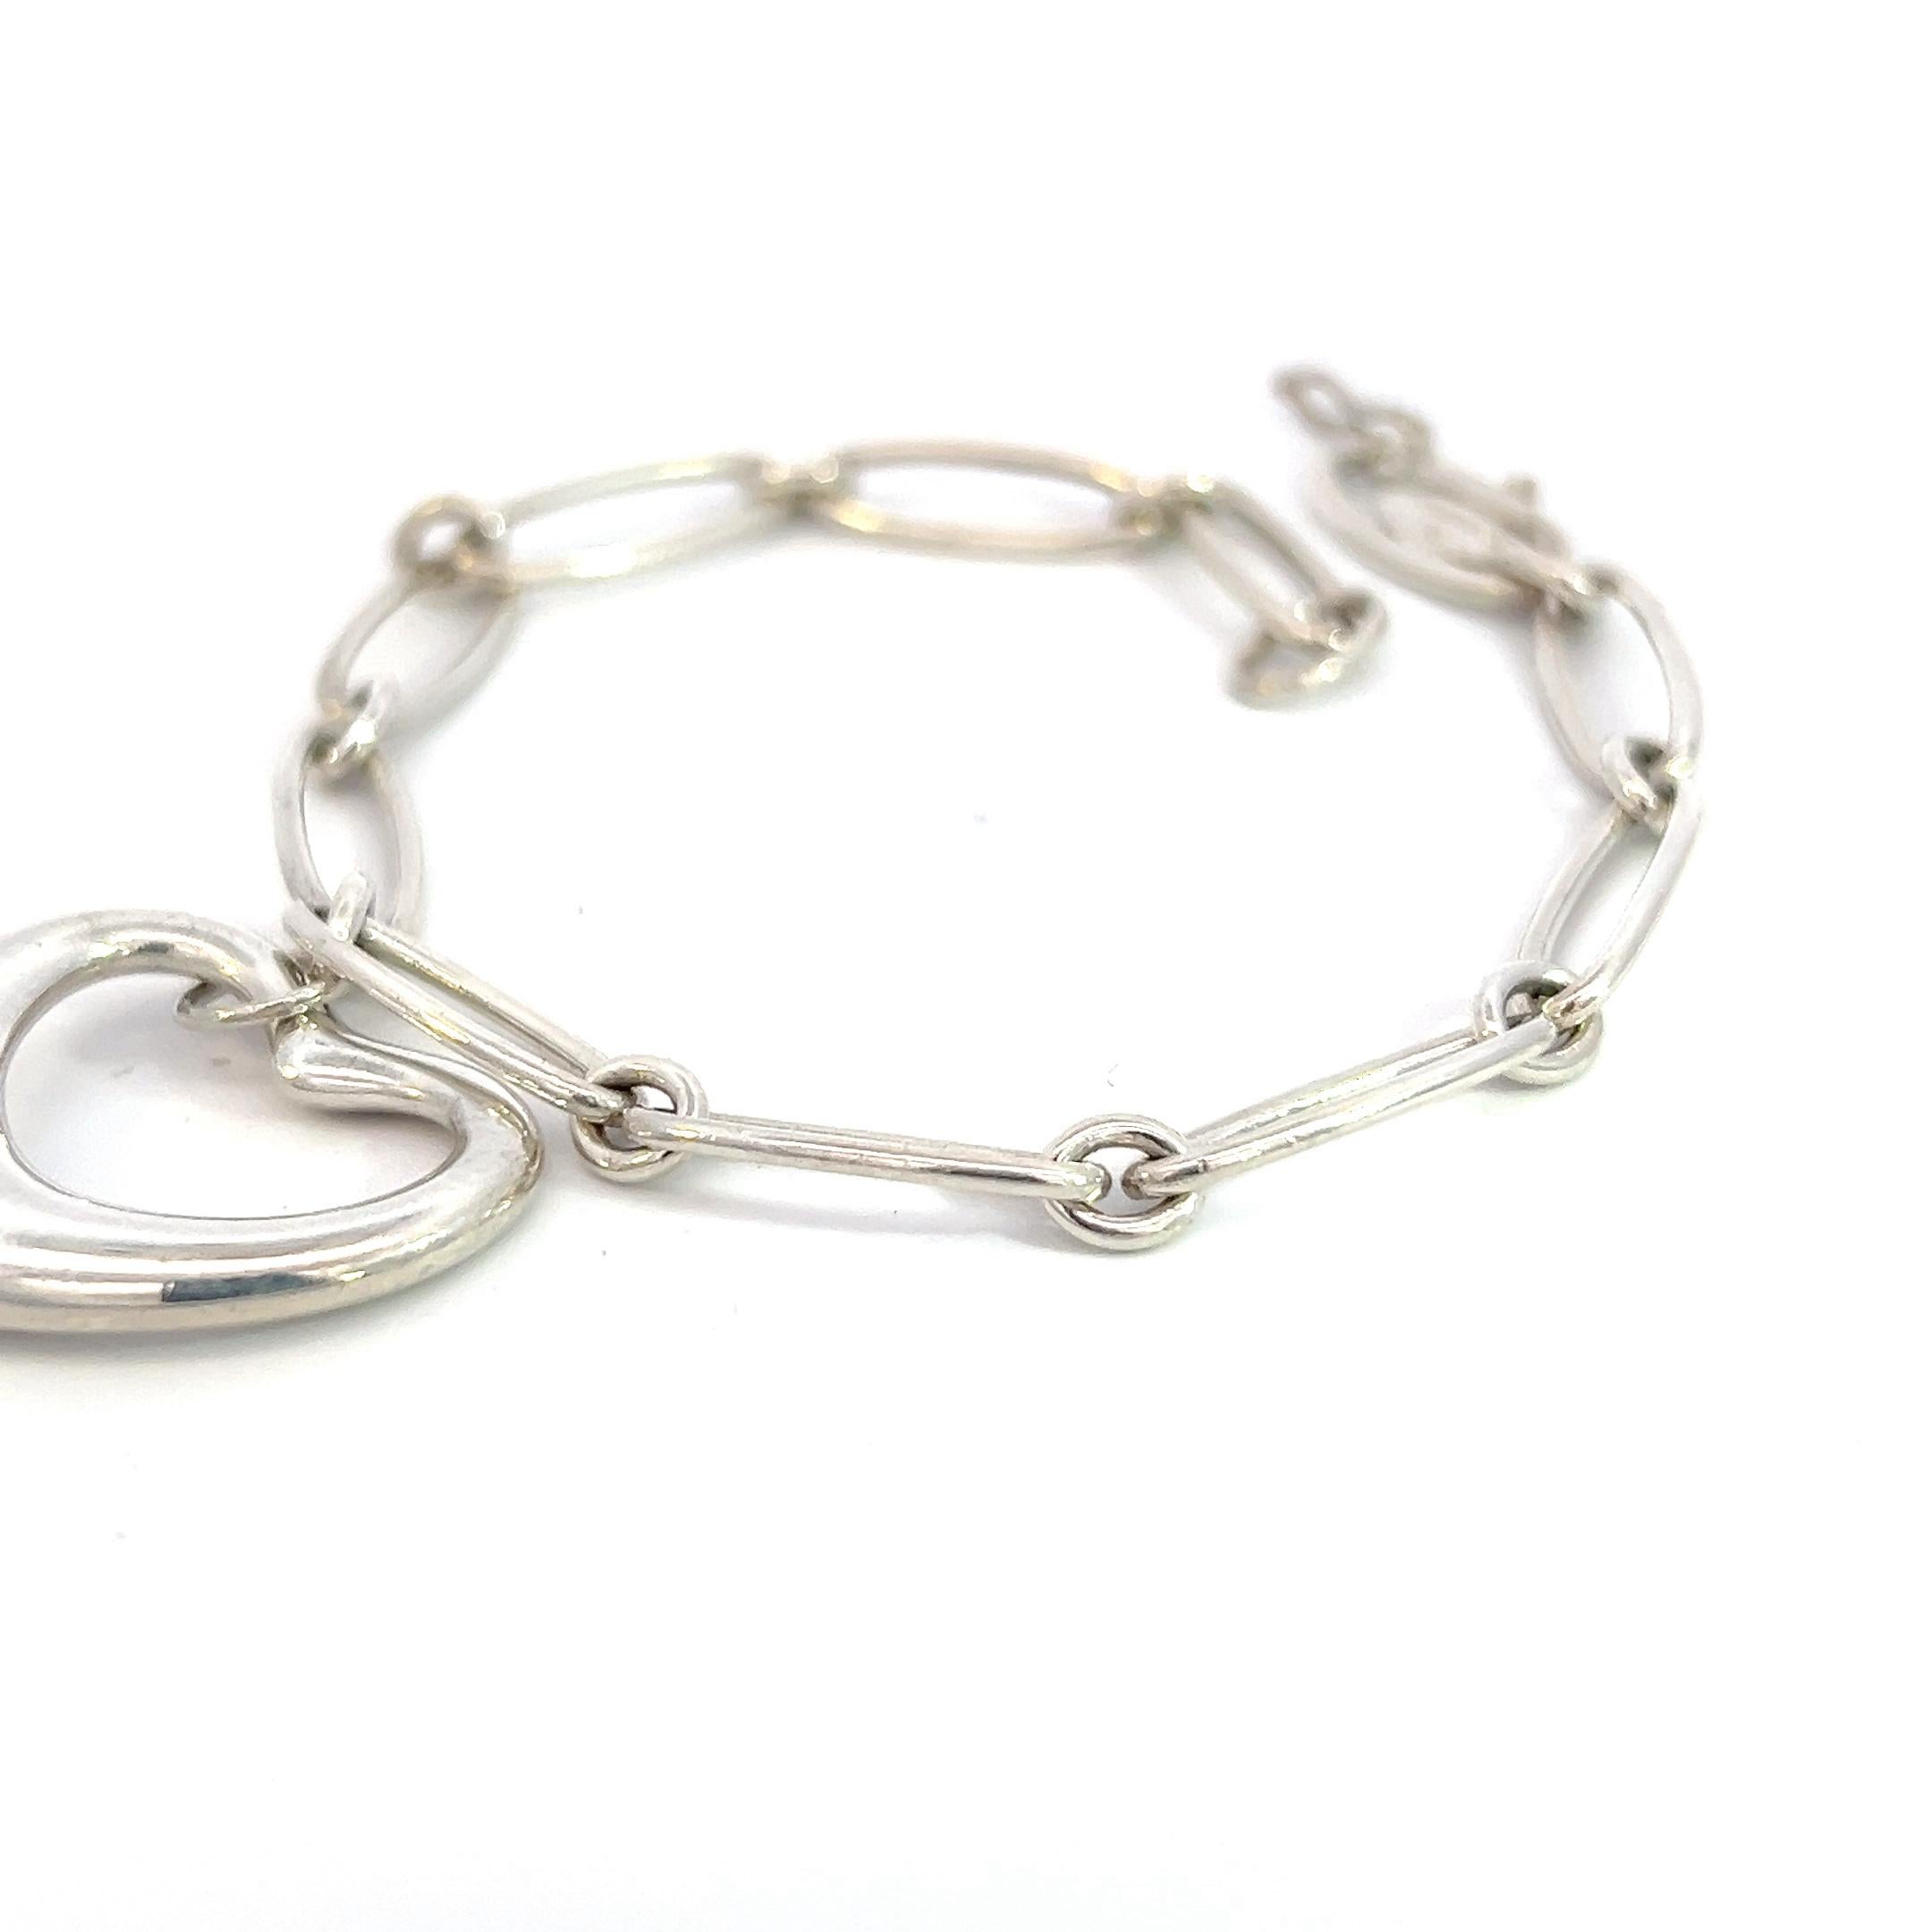 Authentic Tiffany & Co Estate Bracelet with Heart 7